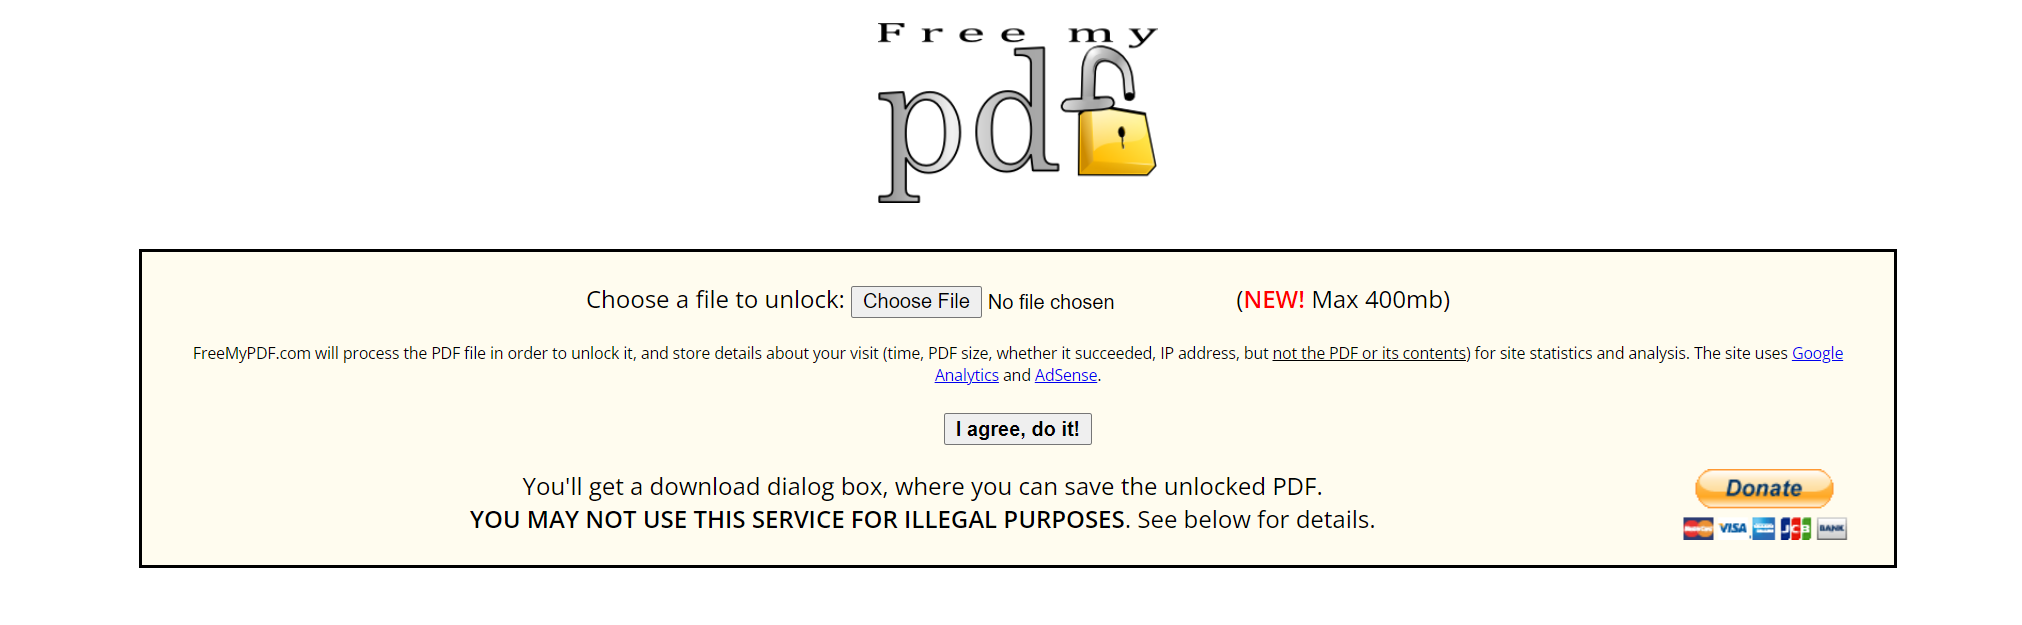 How To Use Freemypdf To Unlock Restricted Pdf Files